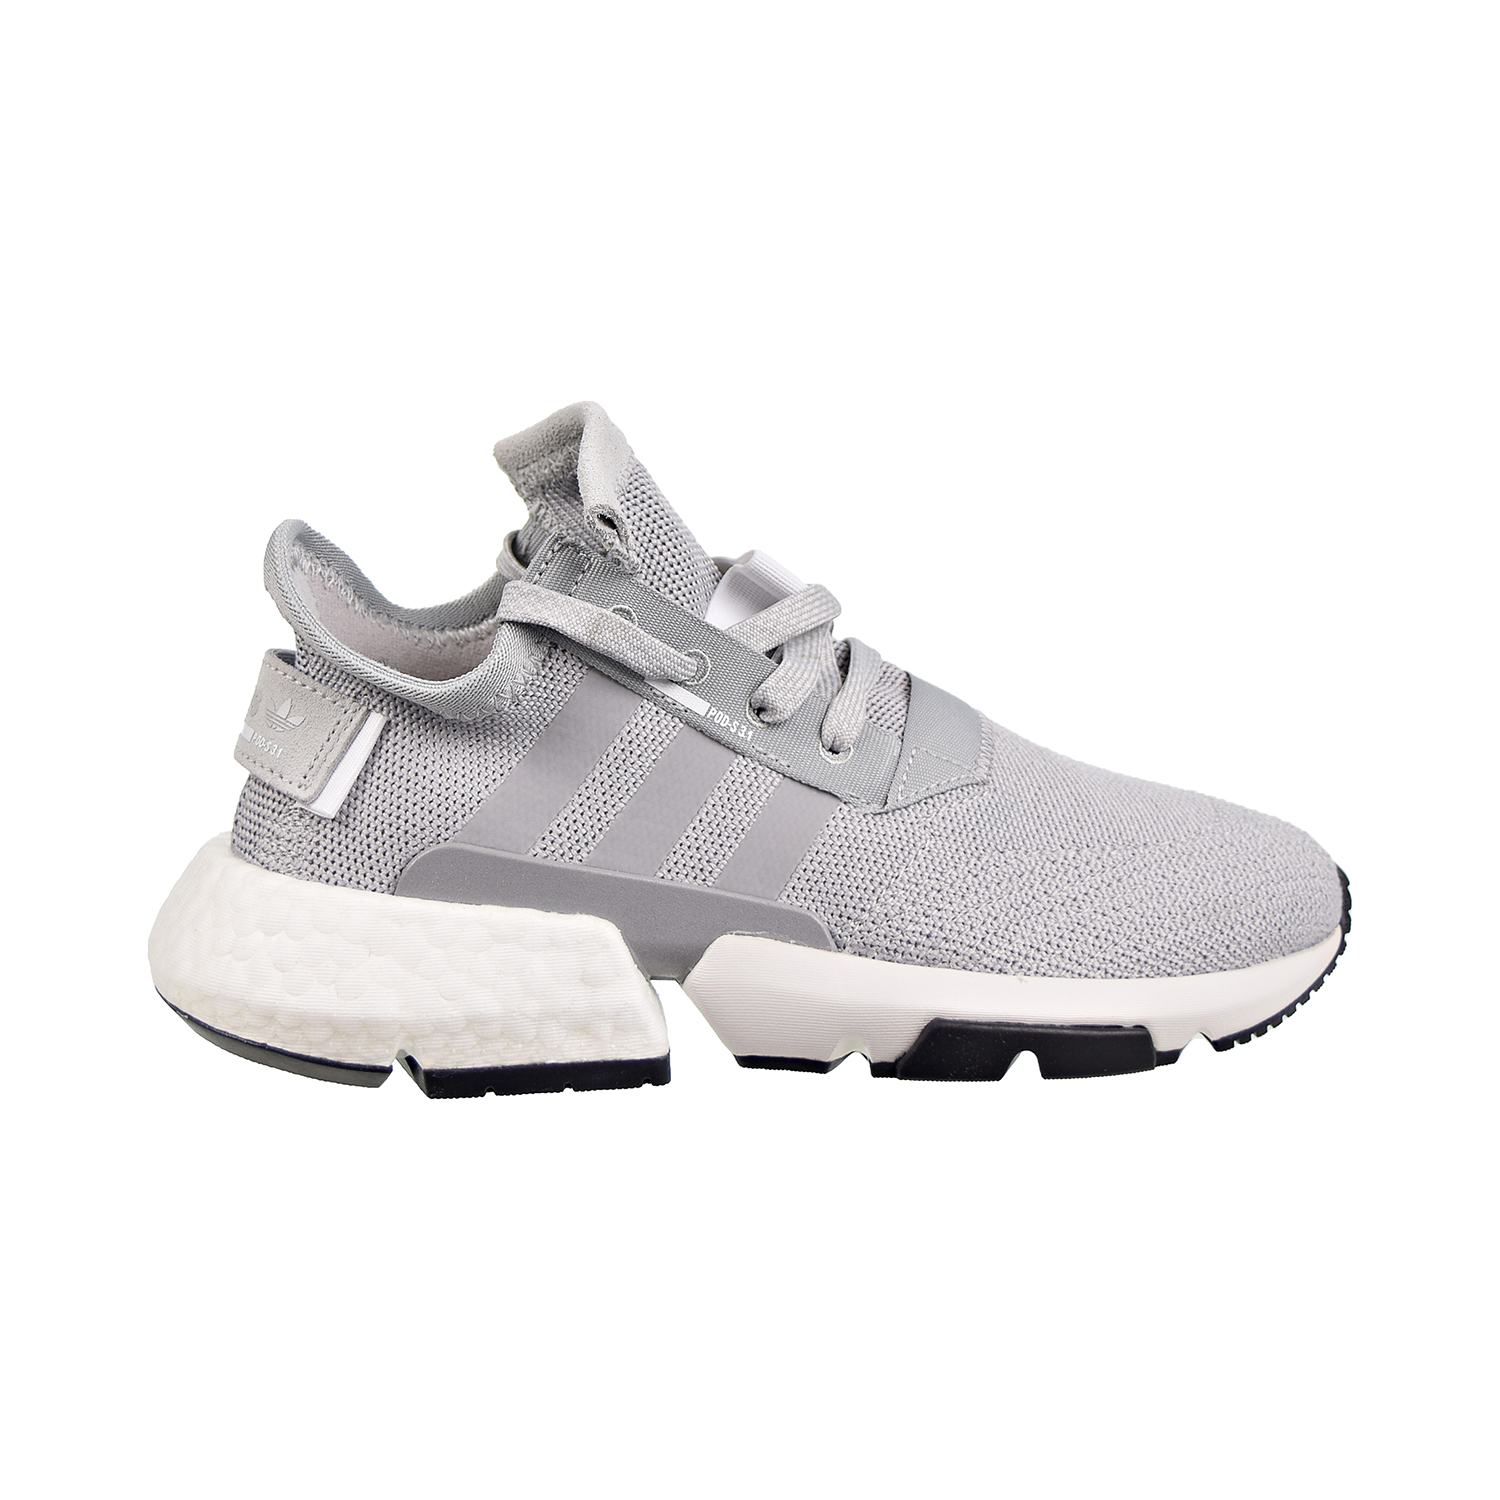 Shoes Grey Two-Reflective Silver CG6989 